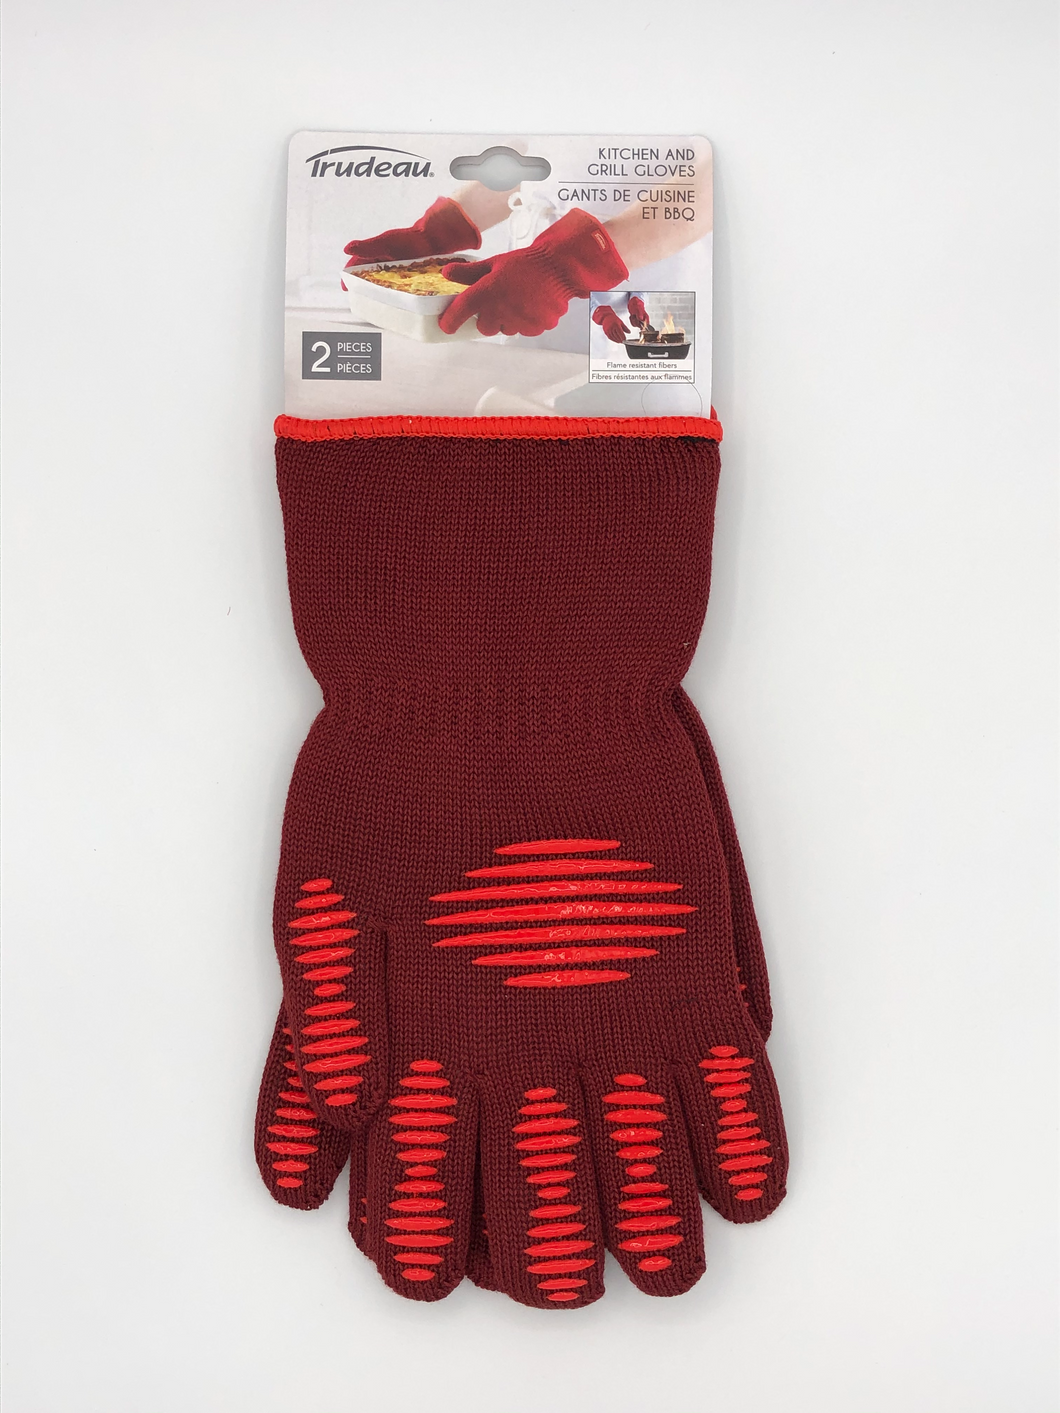 Trudeau Kitchen and Grill Gloves